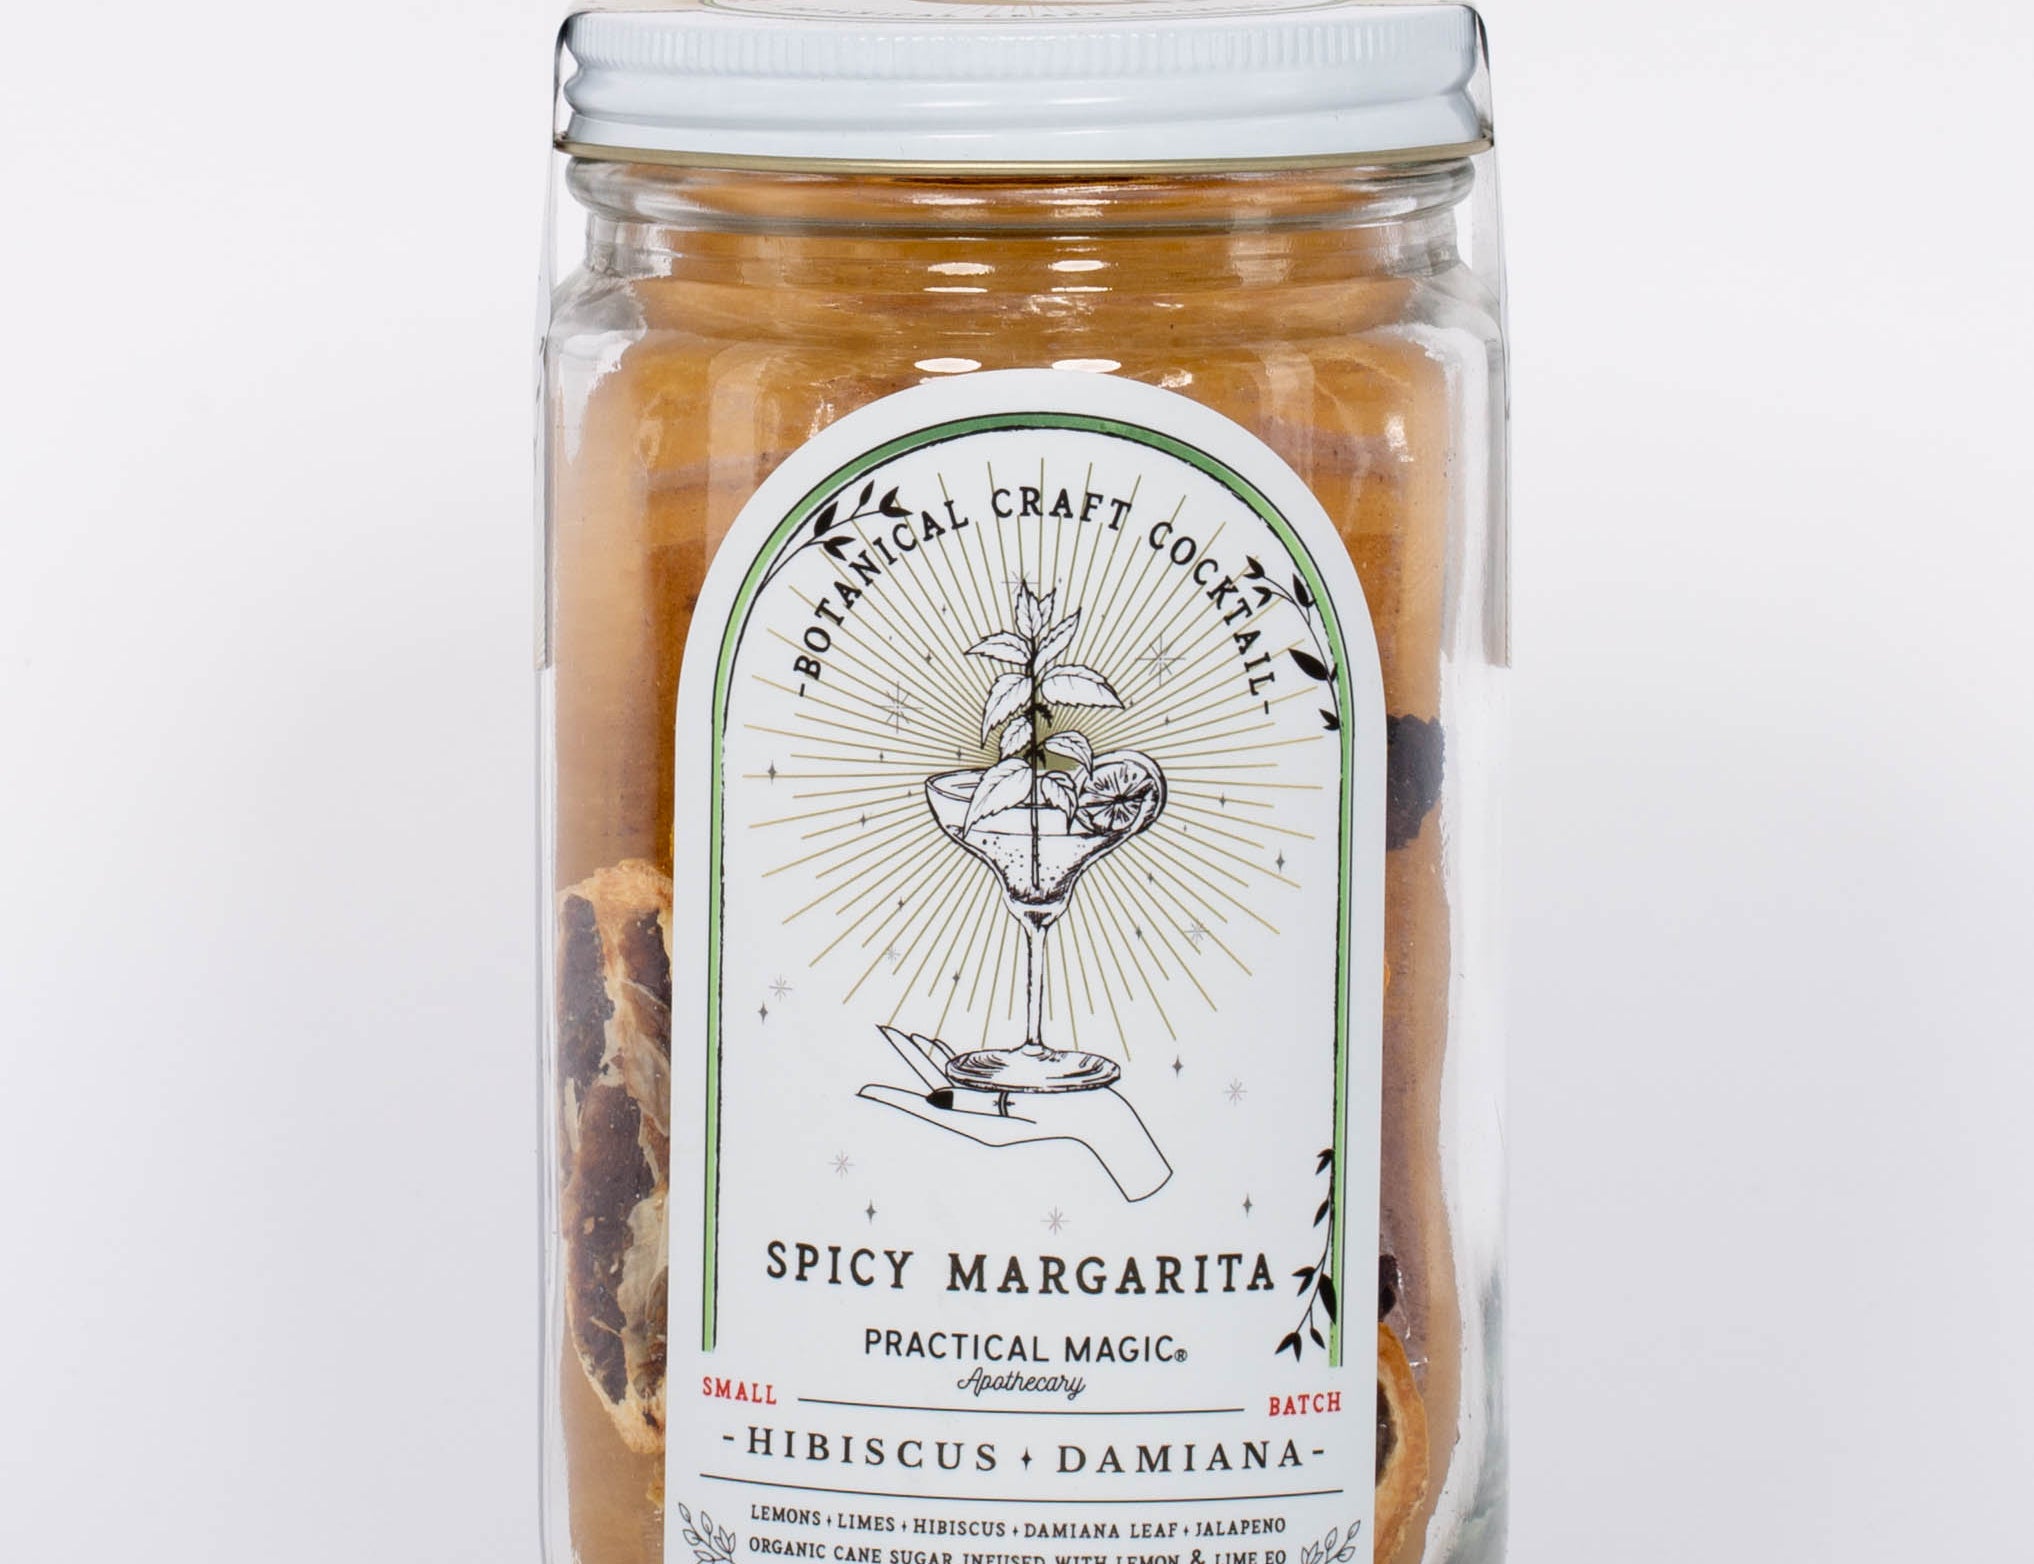 Spicy Margarita Botanical Craft Cocktails Kit by Practical Magic in clear jar with white lid and detailed illustration on label. 